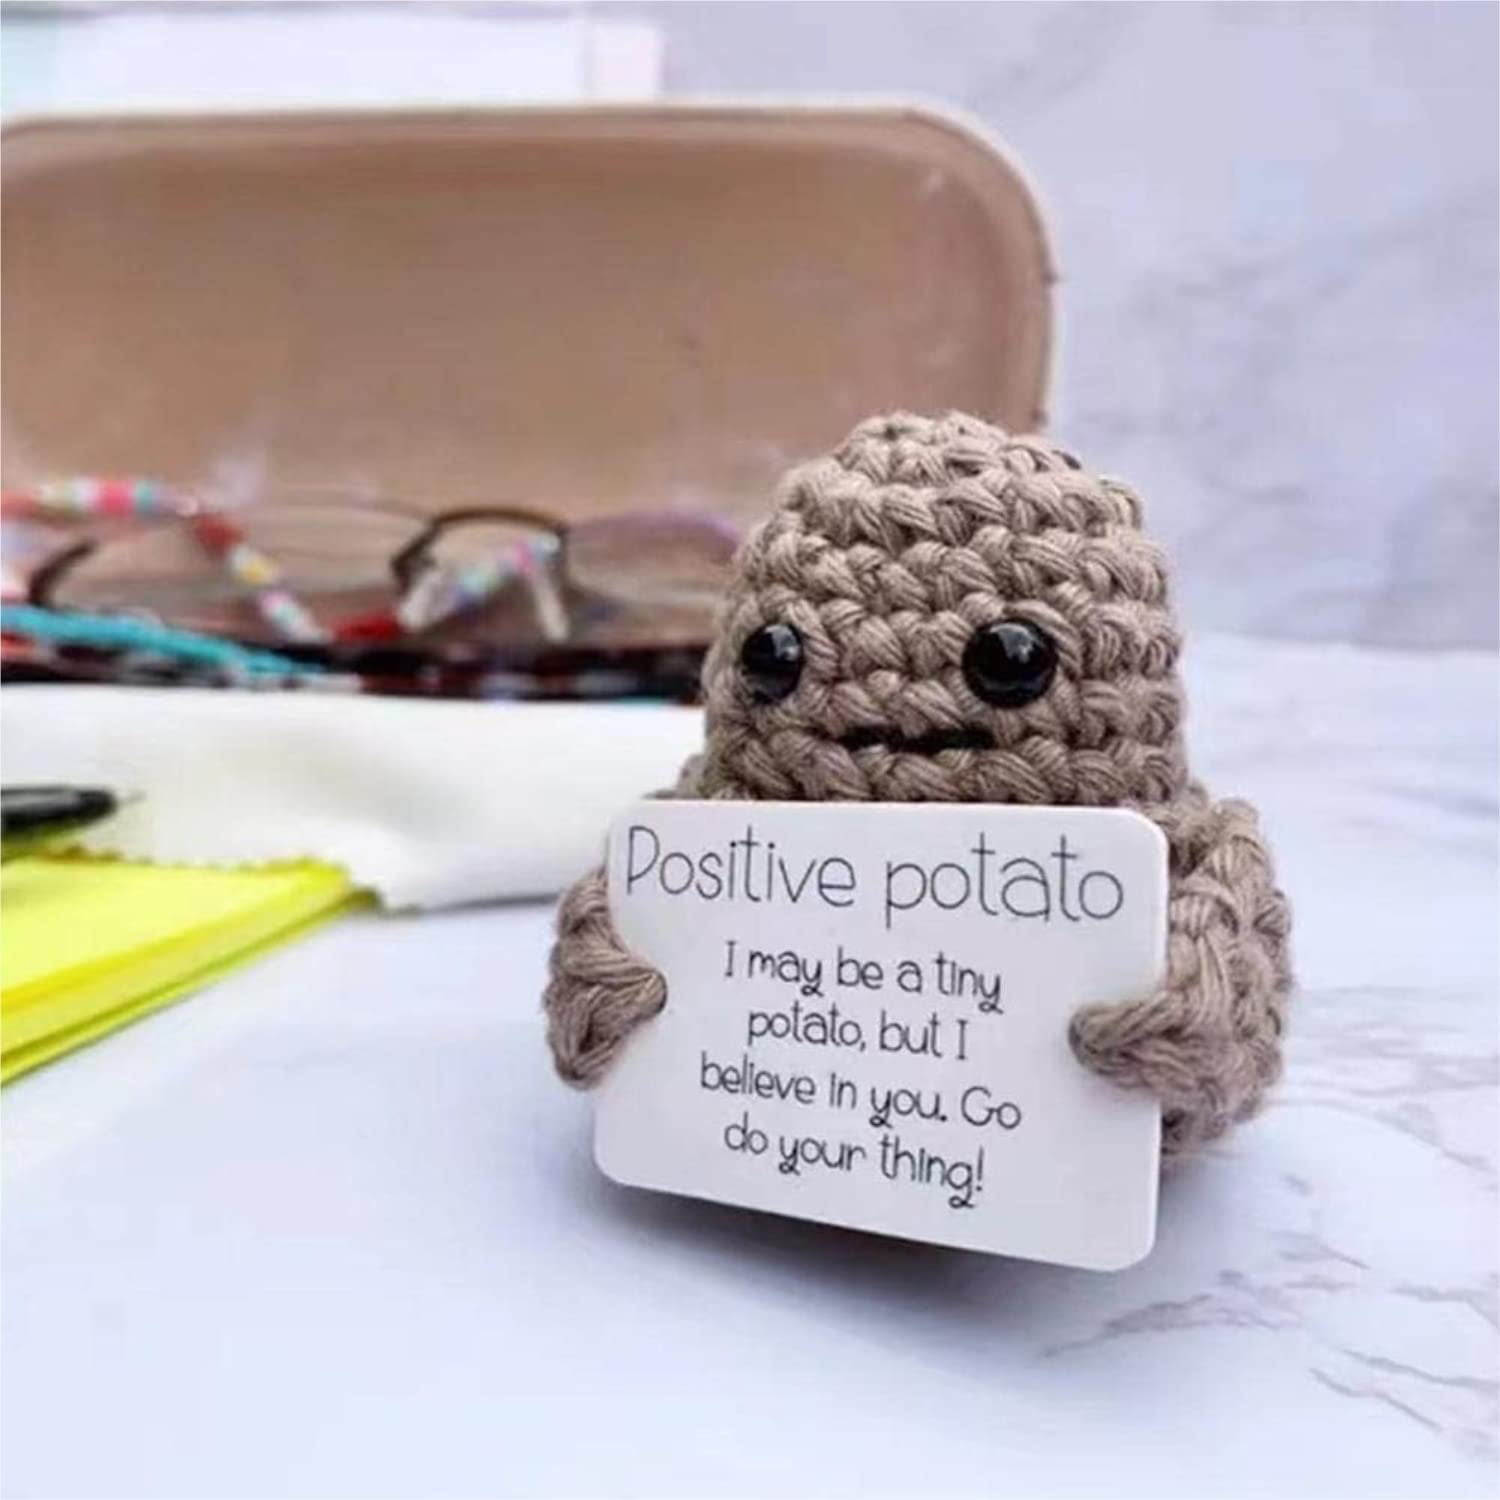 Handmade Positive Potato Pocket Hug Funny Gifts for Friend, Knitting Doll  Funny Positive Potato with Incentive Card Decoration 